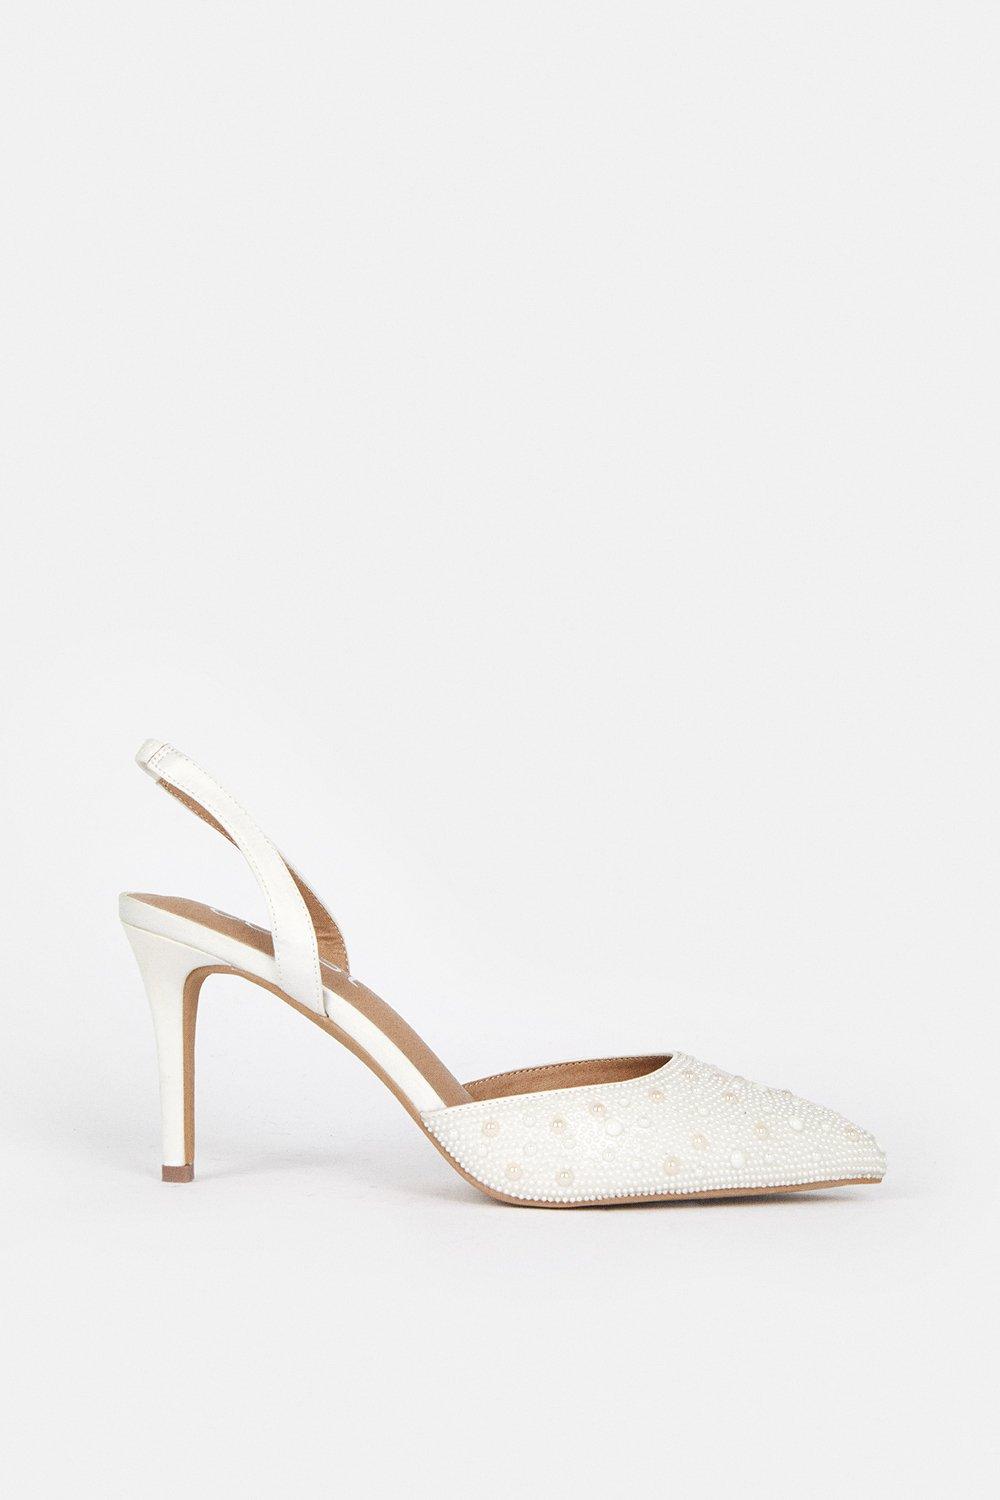 All Over Pearl Mid Heel Sling Back Shoe - Ivory